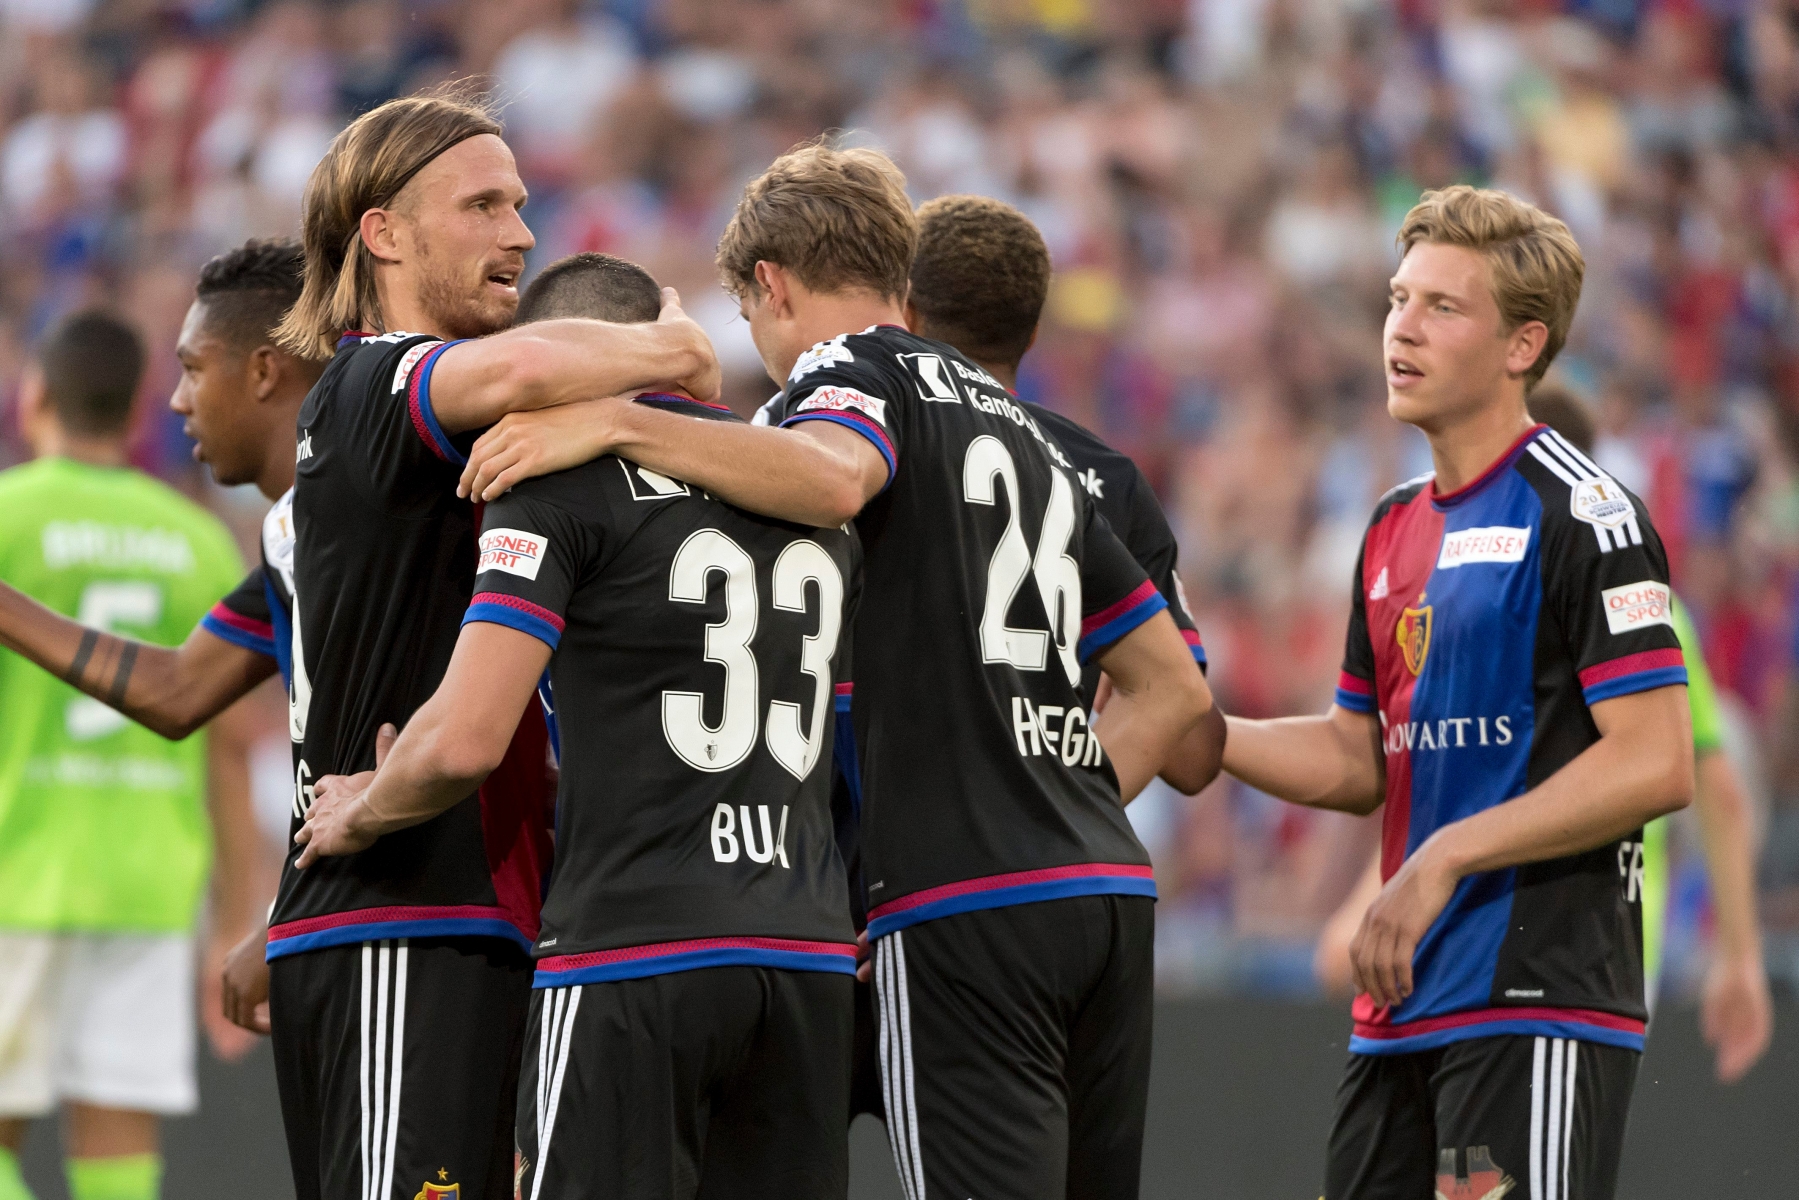 Basel's players cheer after scoring during a friendly soccer match between Switzerland's FC Basel 1893 and Germany's VfL Wolfsburg at the St. Jakob-Park stadium in Basel, Switzerland, on Tuesday, July 19, 2016. (KEYSTONE/Georgios Kefalas)  SOCCER BASEL WOLFSBURG